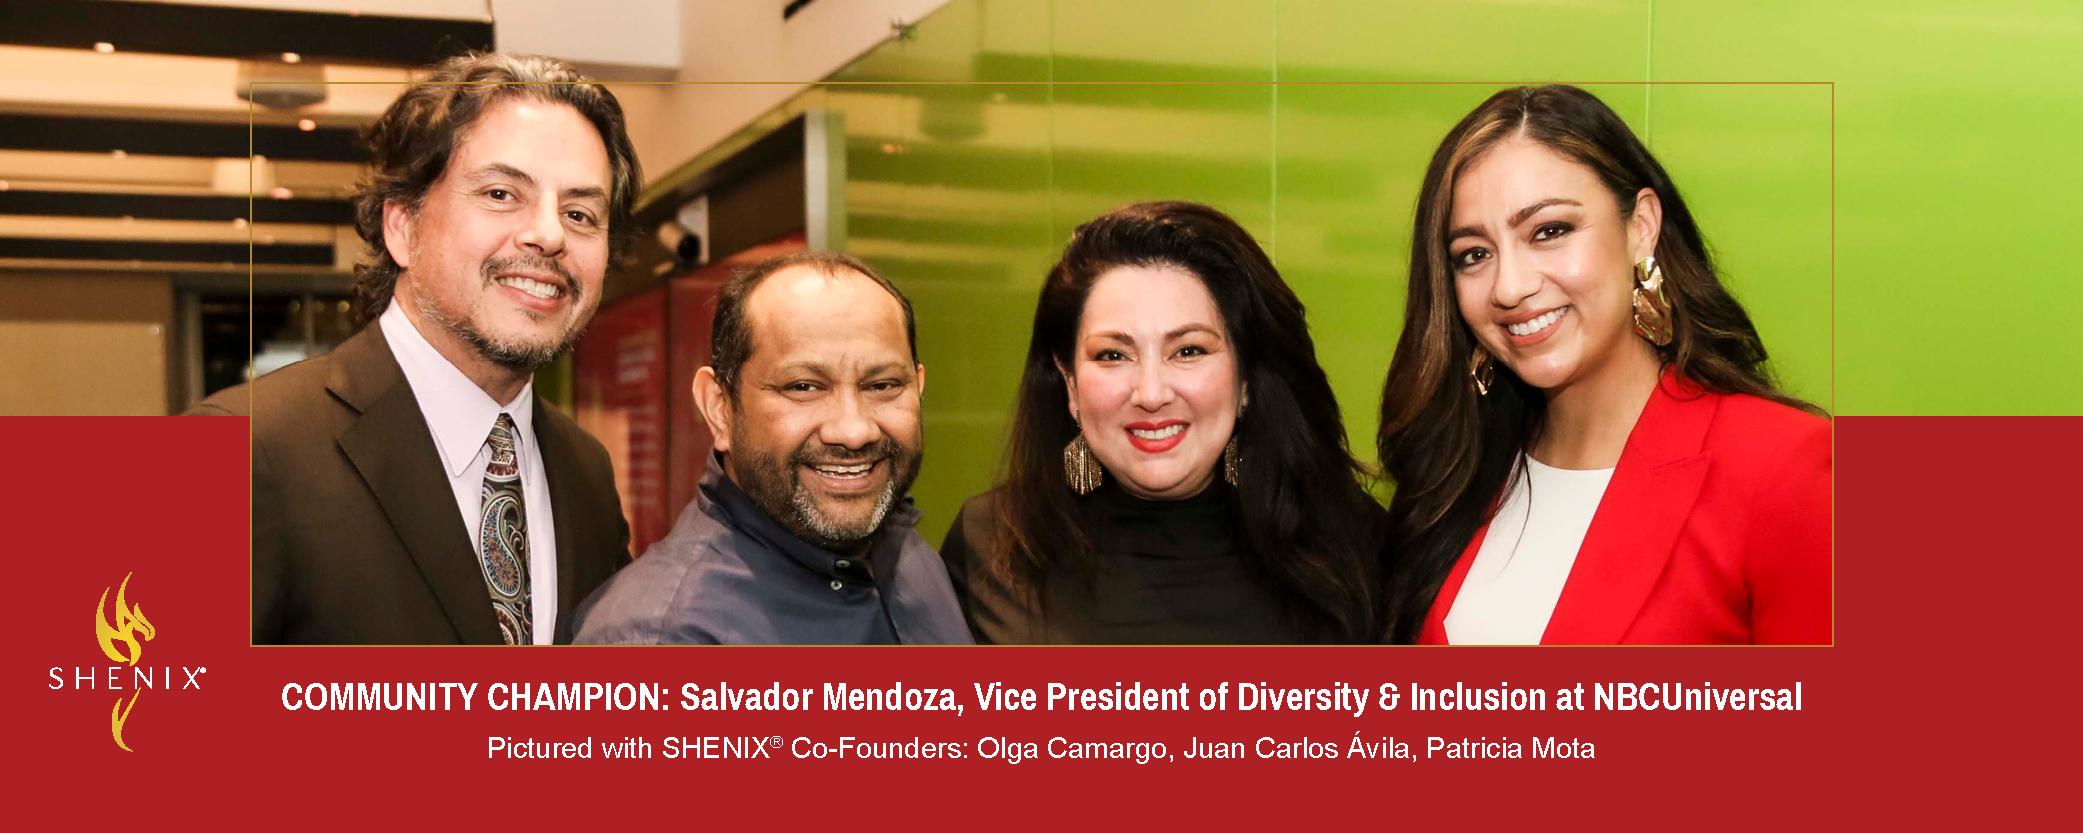 Community Champion Salvador Mendoza Vice President of Diversity Inclusion at NBCUniversal